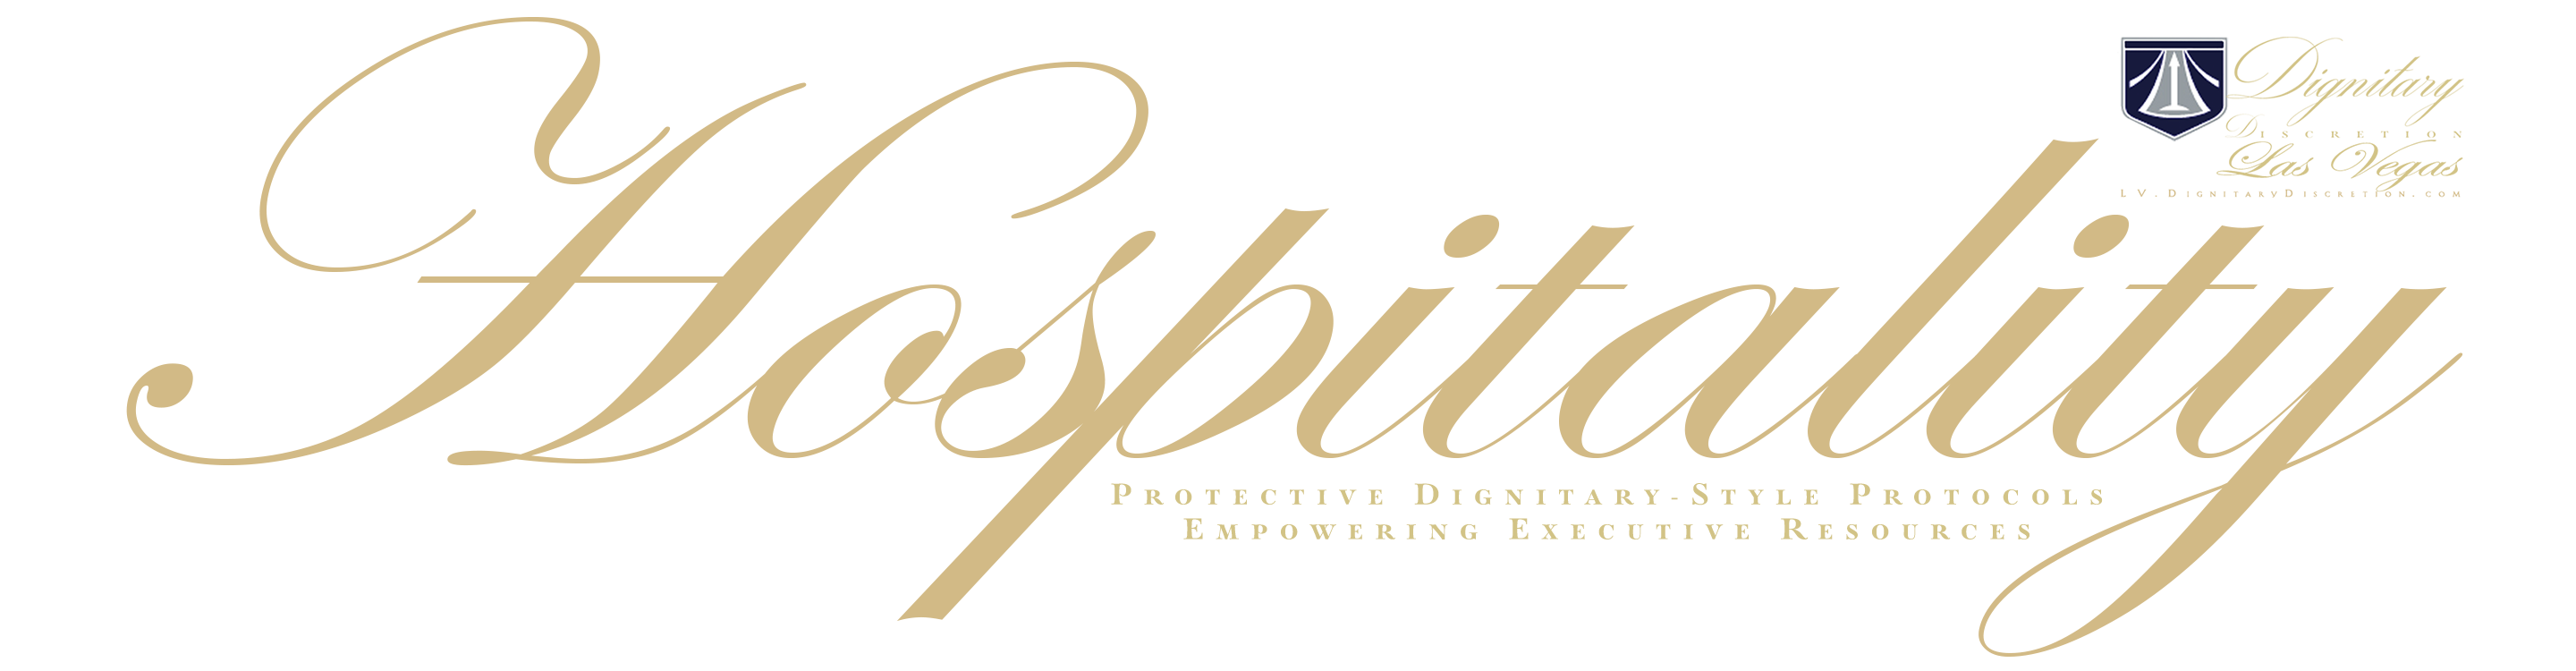 Custom Hospitality Services by Dignitary Discretion